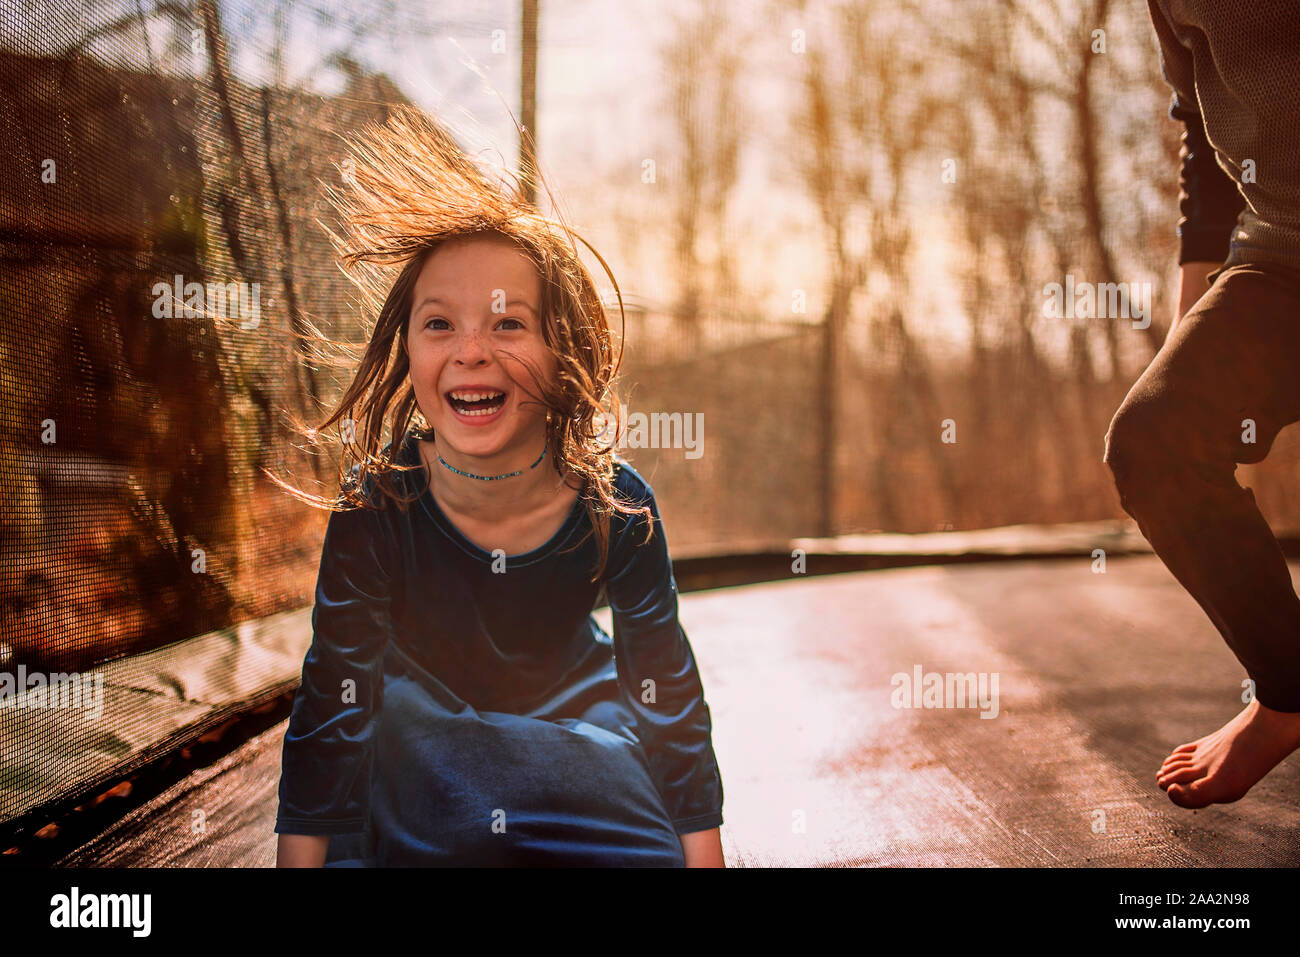 Smiling girl on a trampoline with her brother, USA Stock Photo